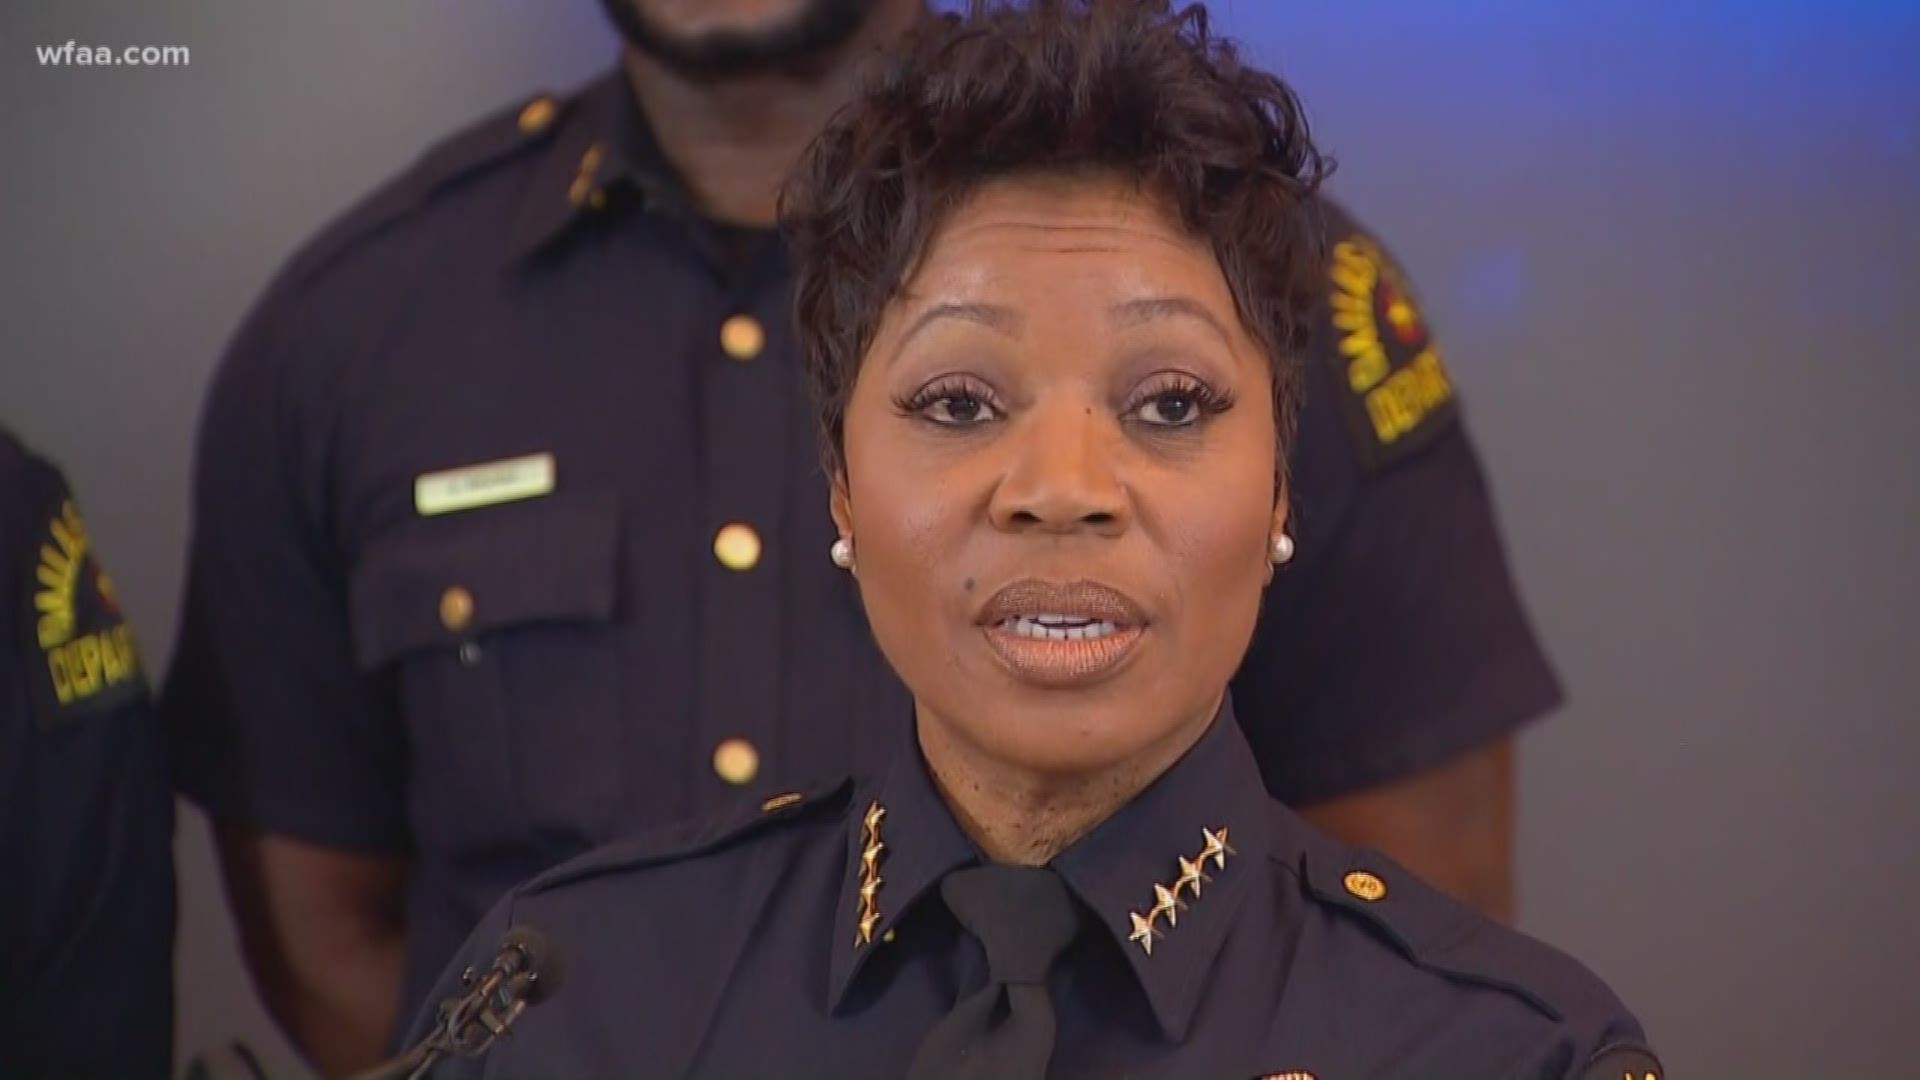 Dallas Police Chief U. Renée Hall has said that the department will launch an internal investigation into the night Botham Jean died.